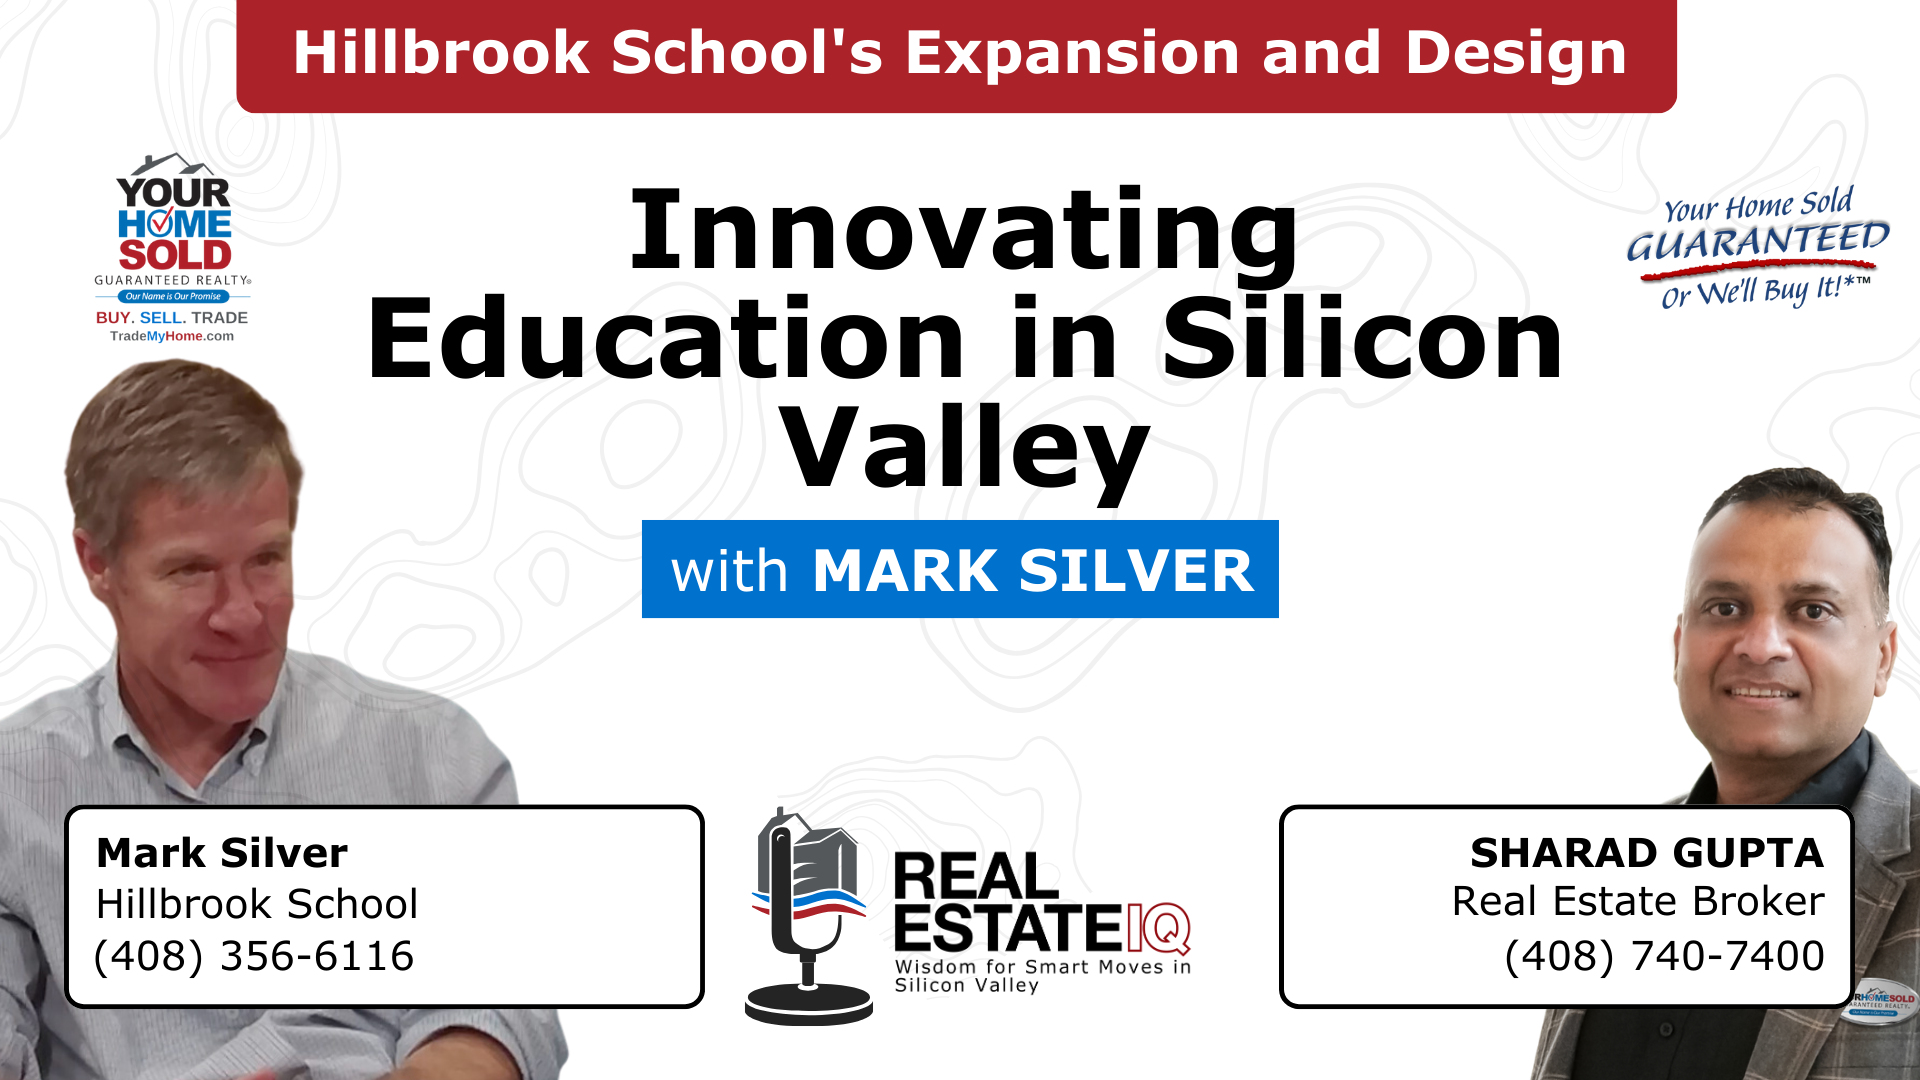 Innovating Education: Hillbrook School’s Expansion and Design in Silicon Valley